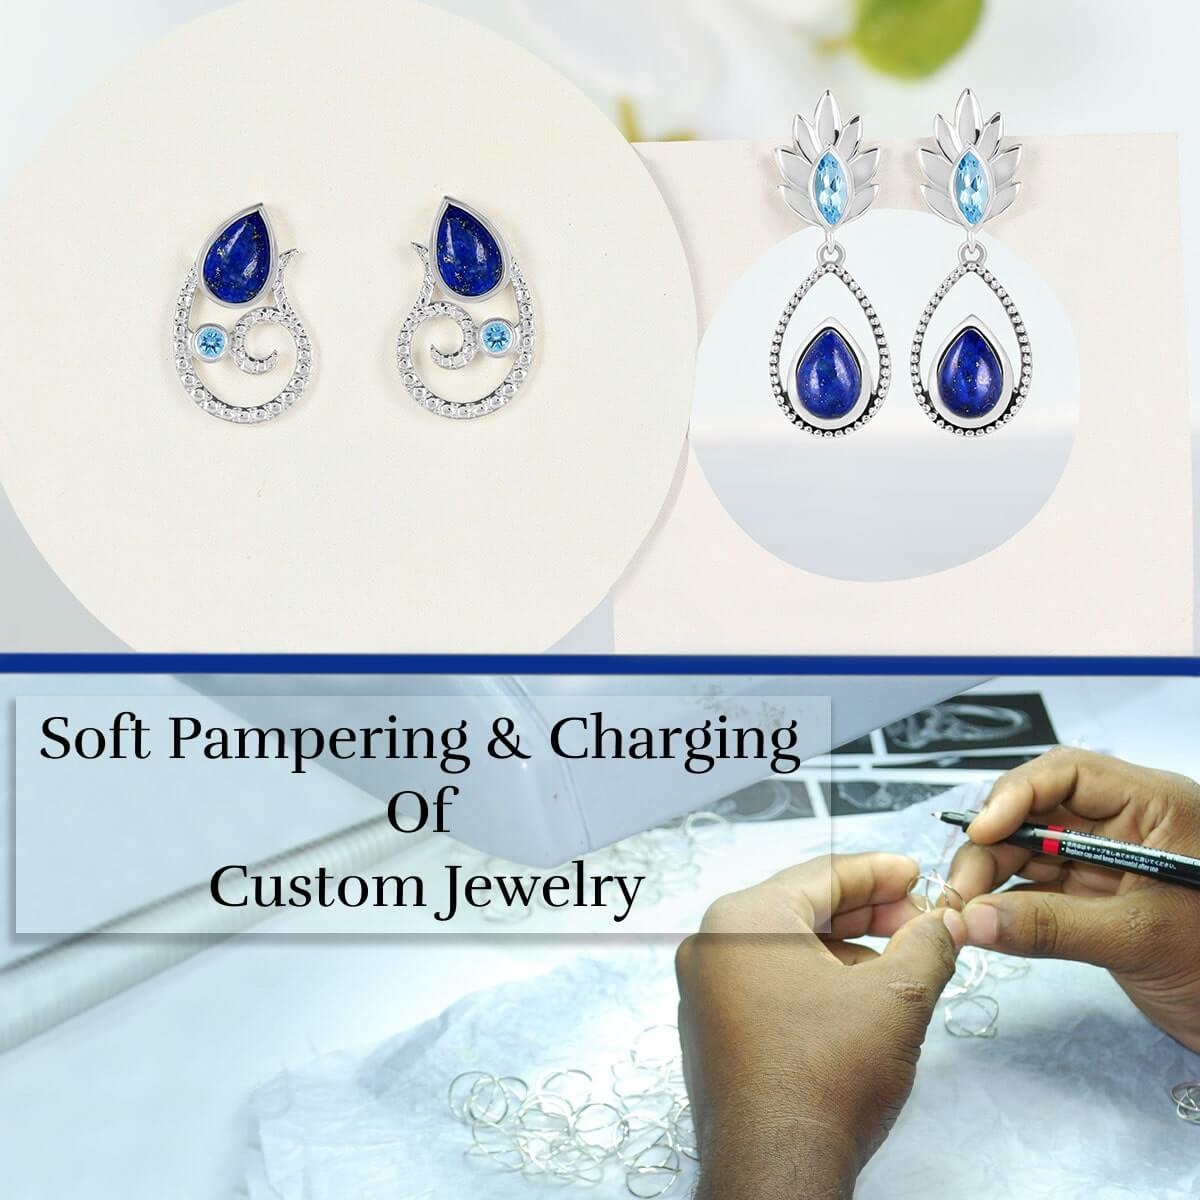 Taking Care and Cleansing Of Custom Jewelry For Personal Expression